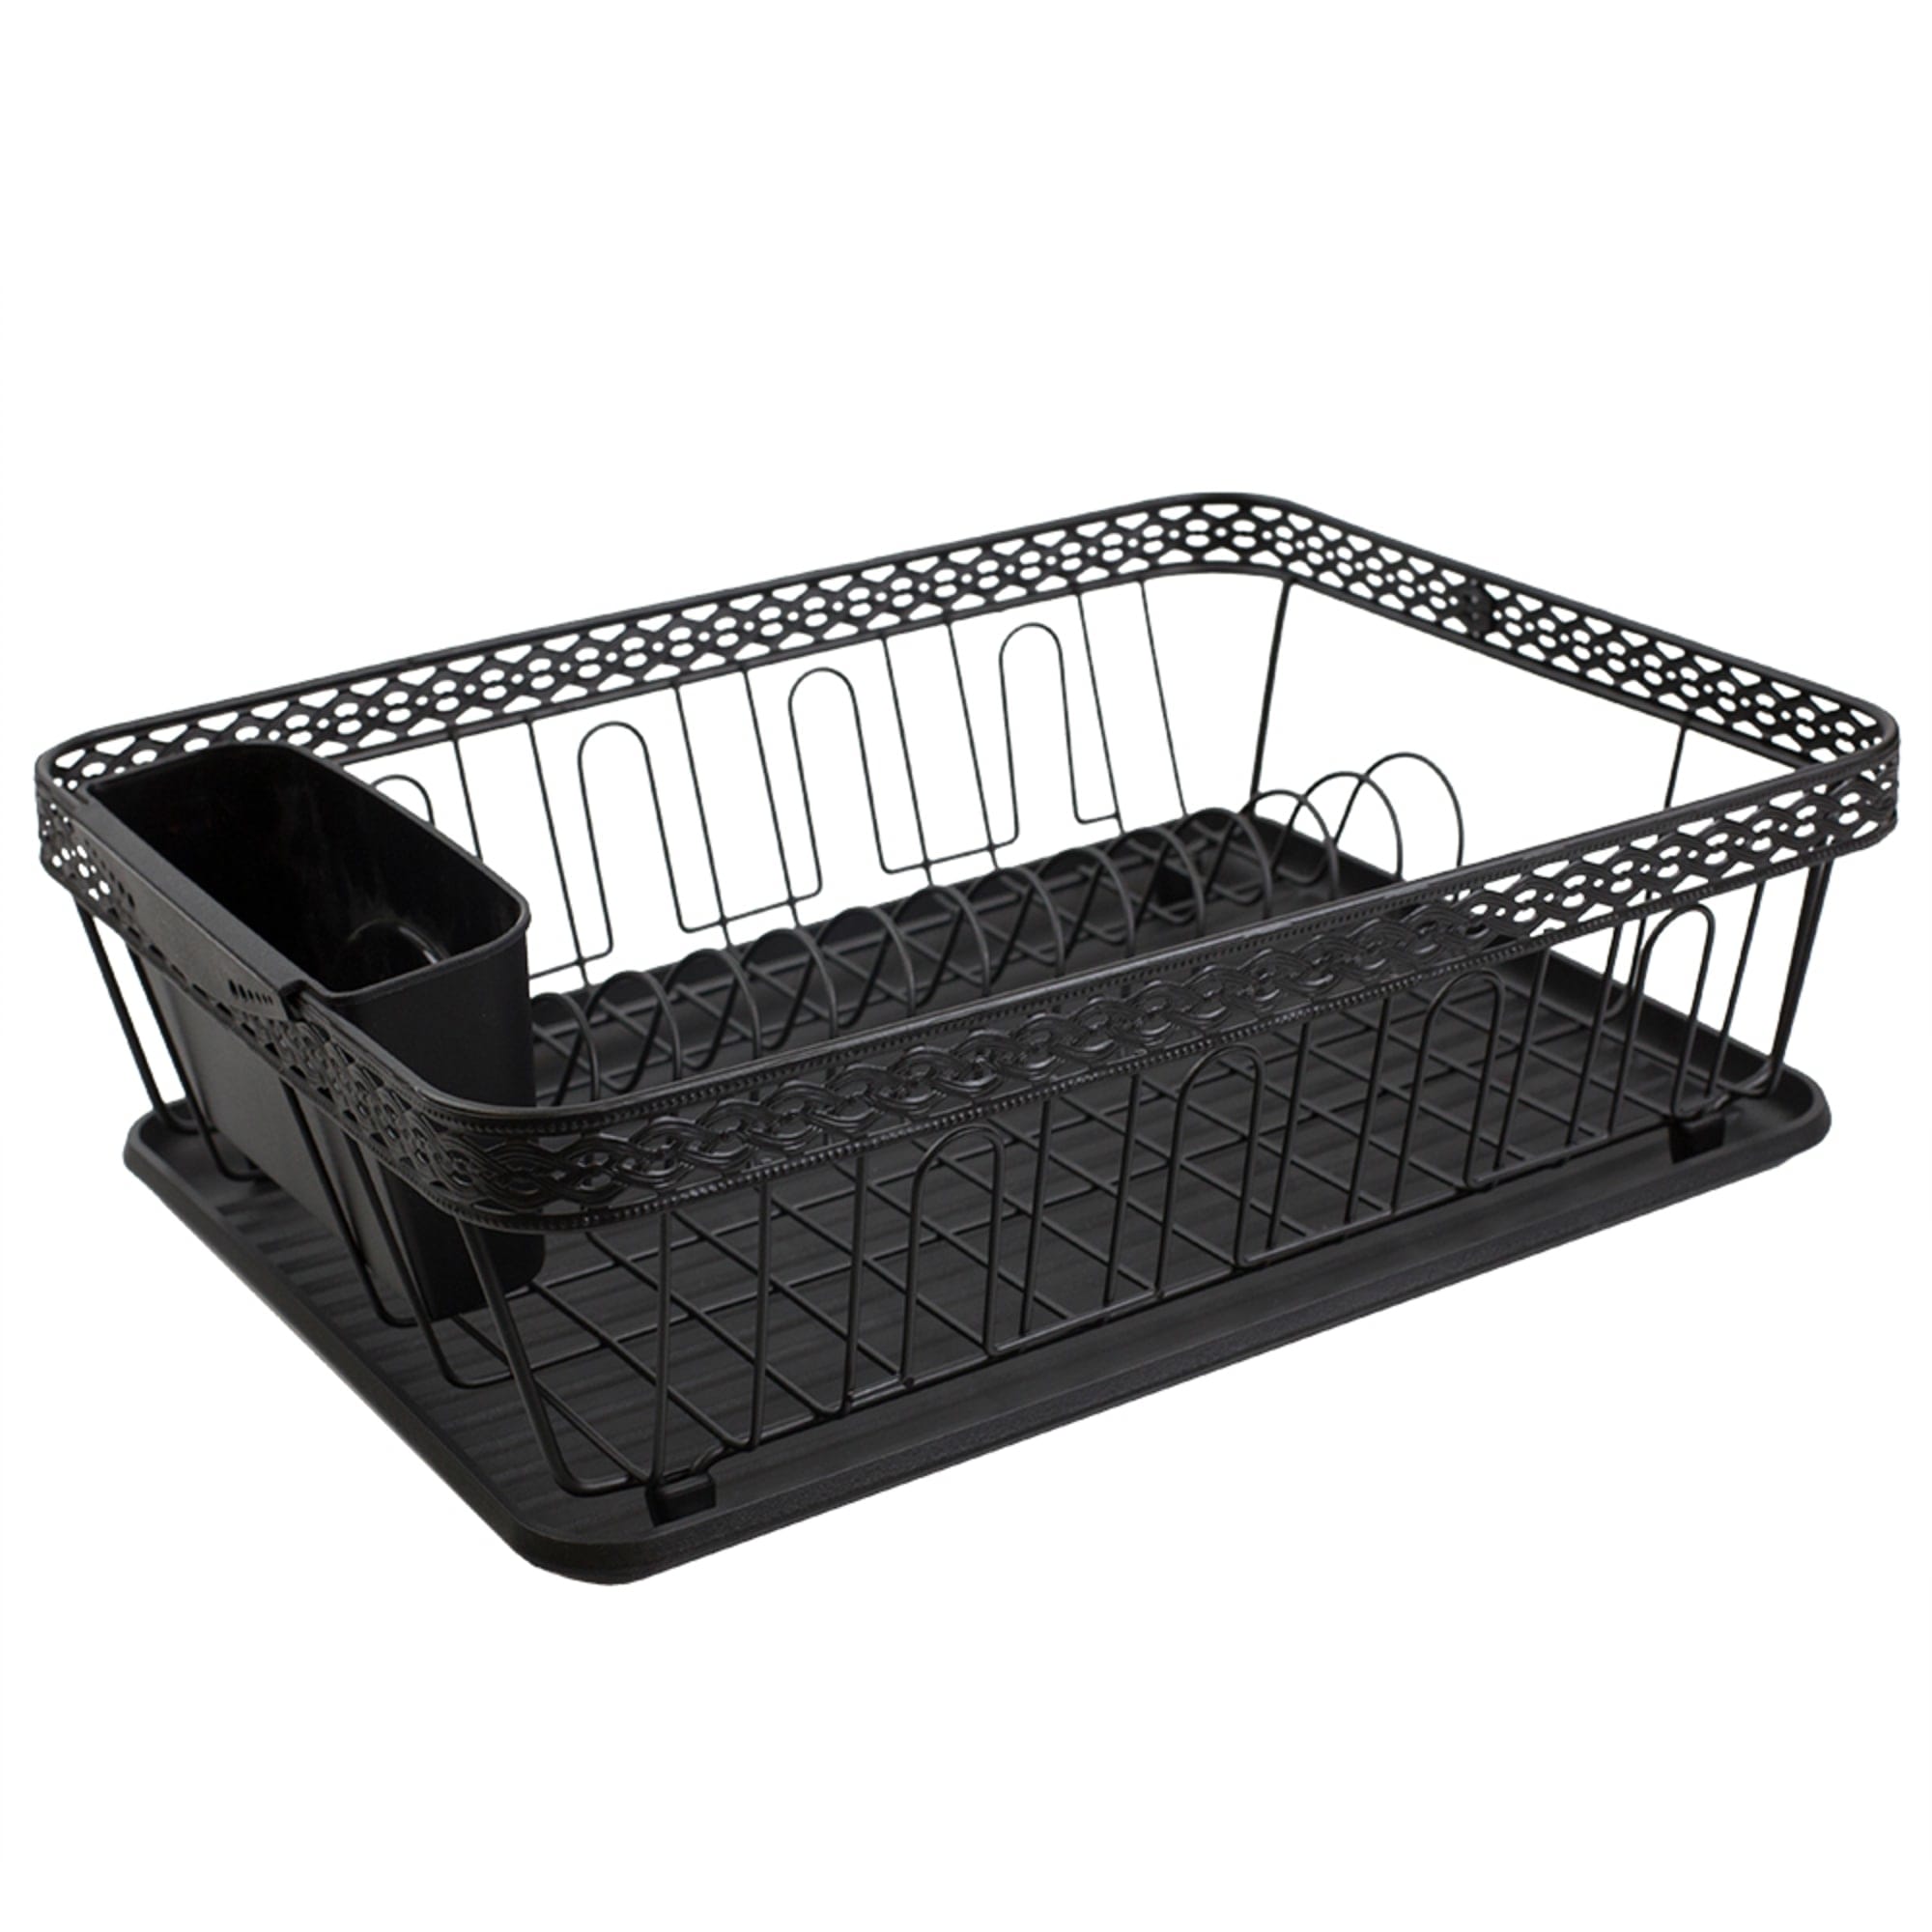 Home Basics 3 Piece Decorative Wire Dish Rack, Black $15.00 EACH, CASE PACK OF 6